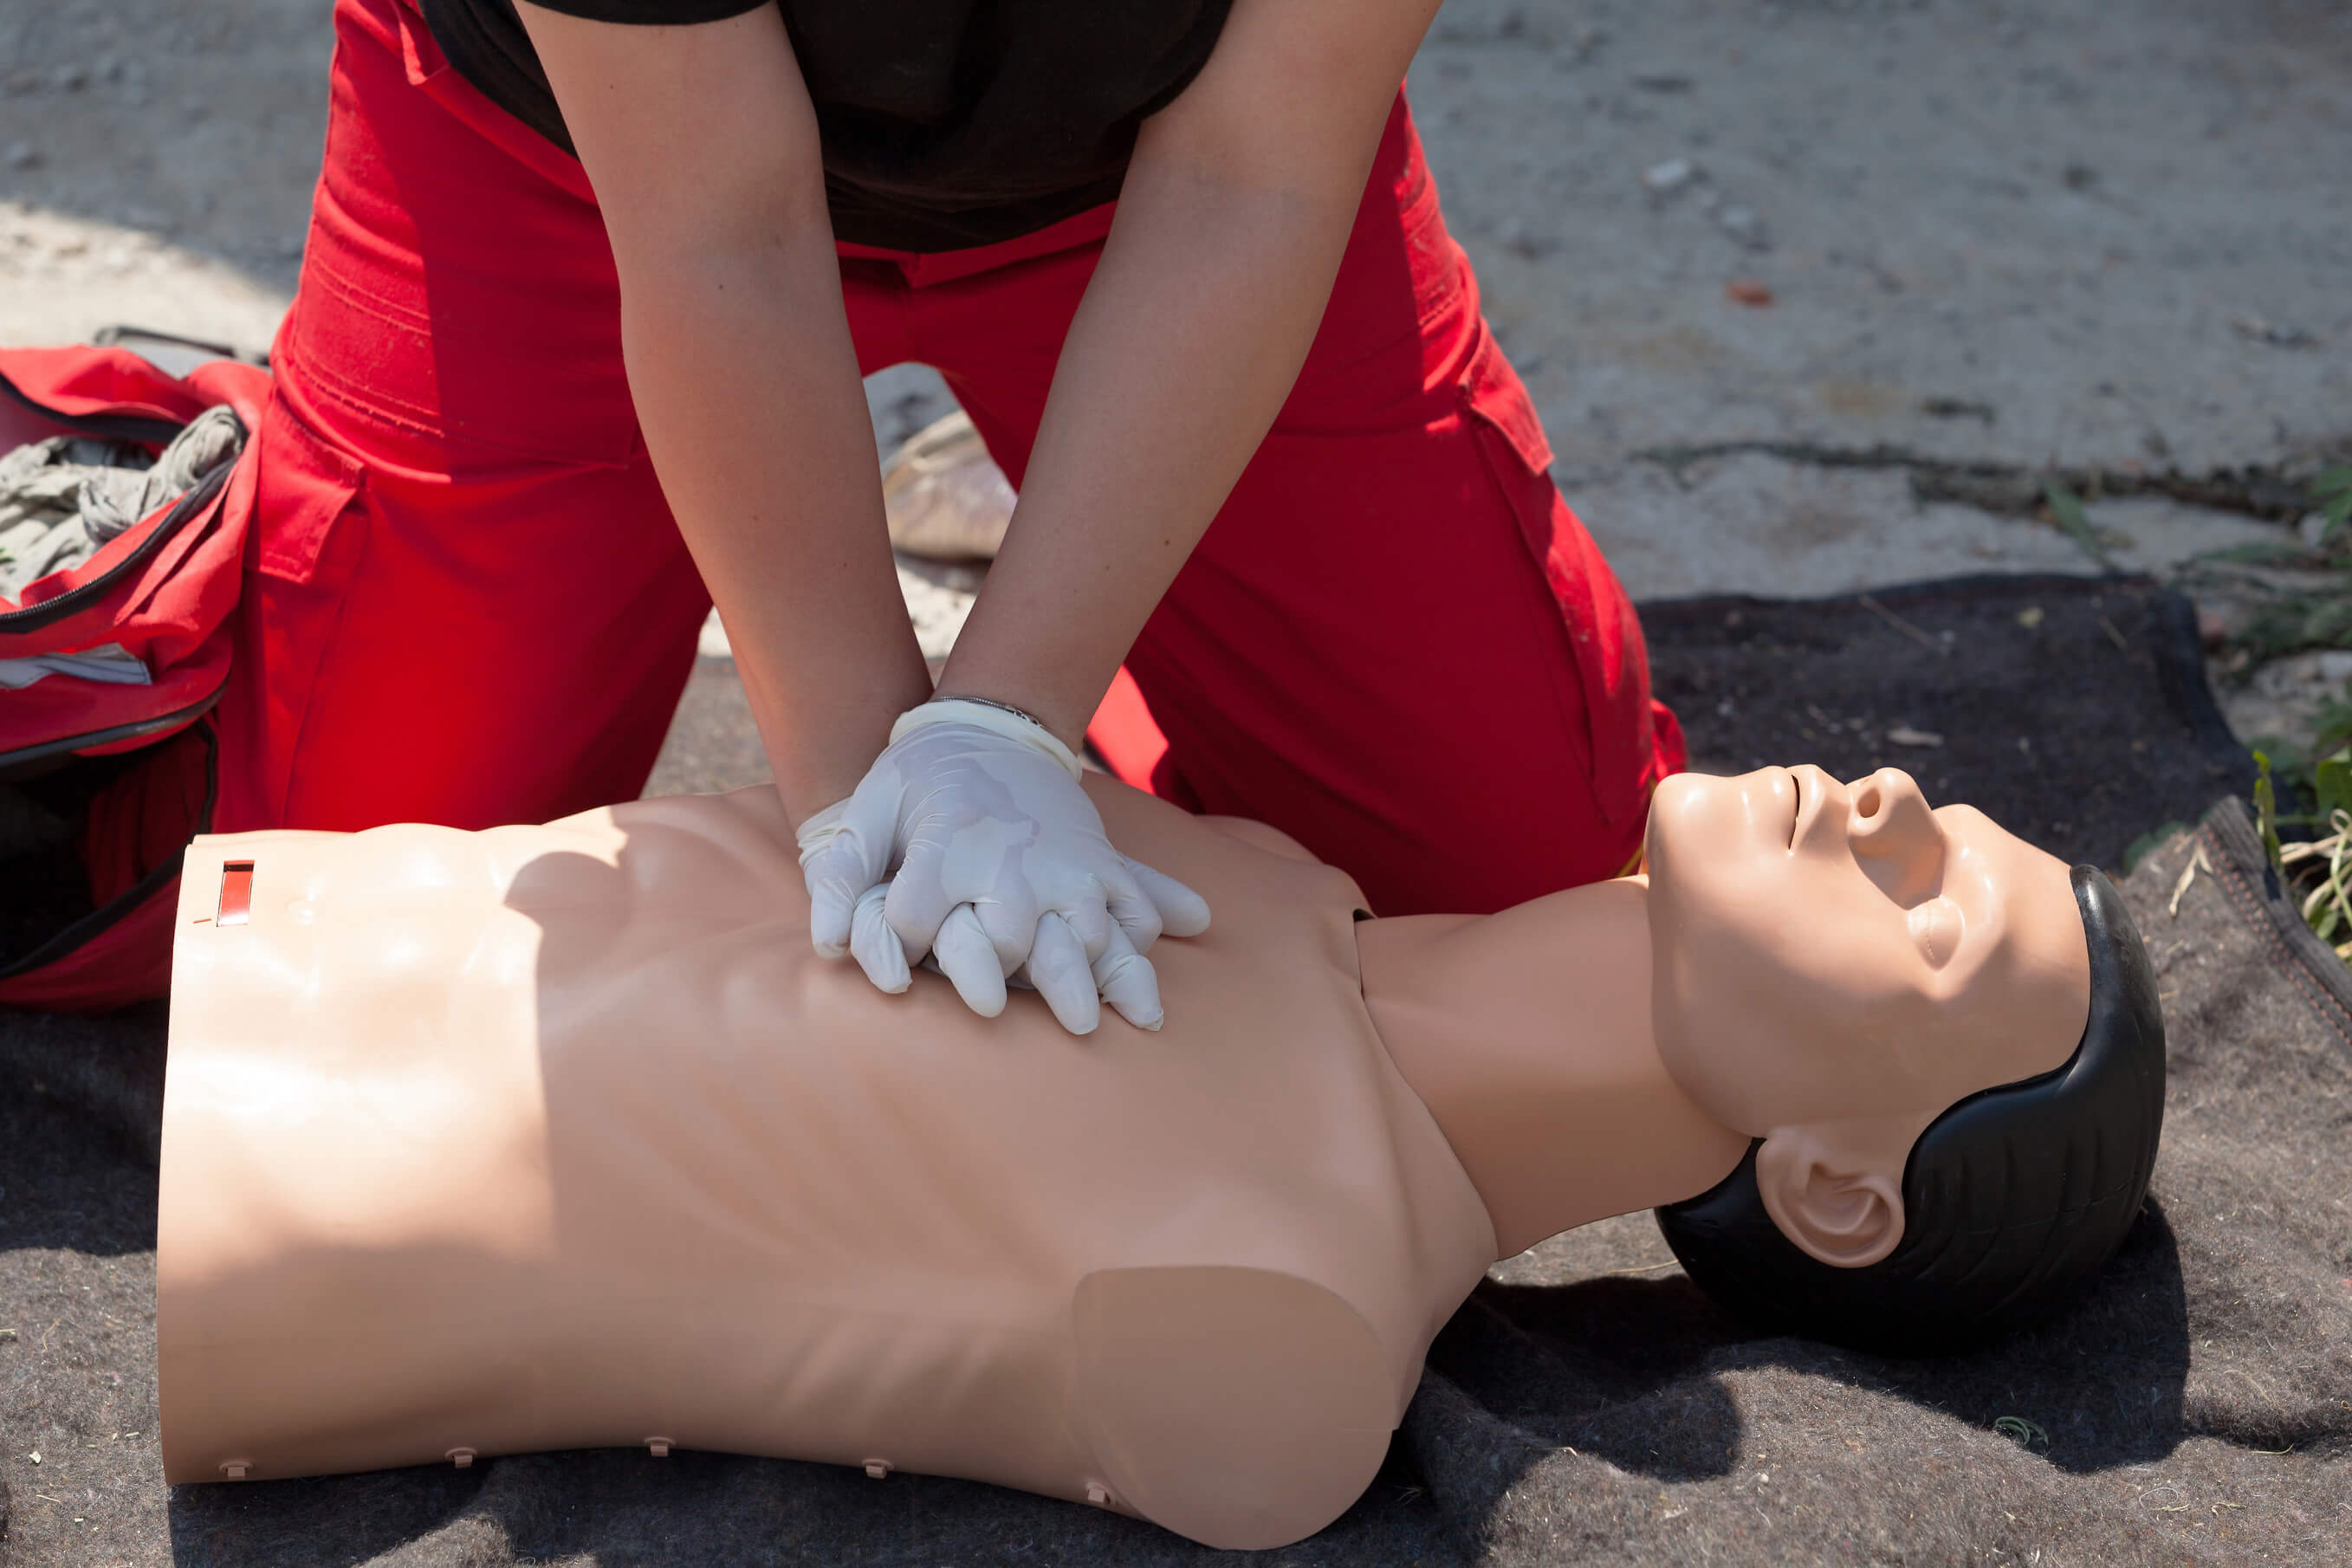 First aid training. CPR being performed on a medical-training manikin.